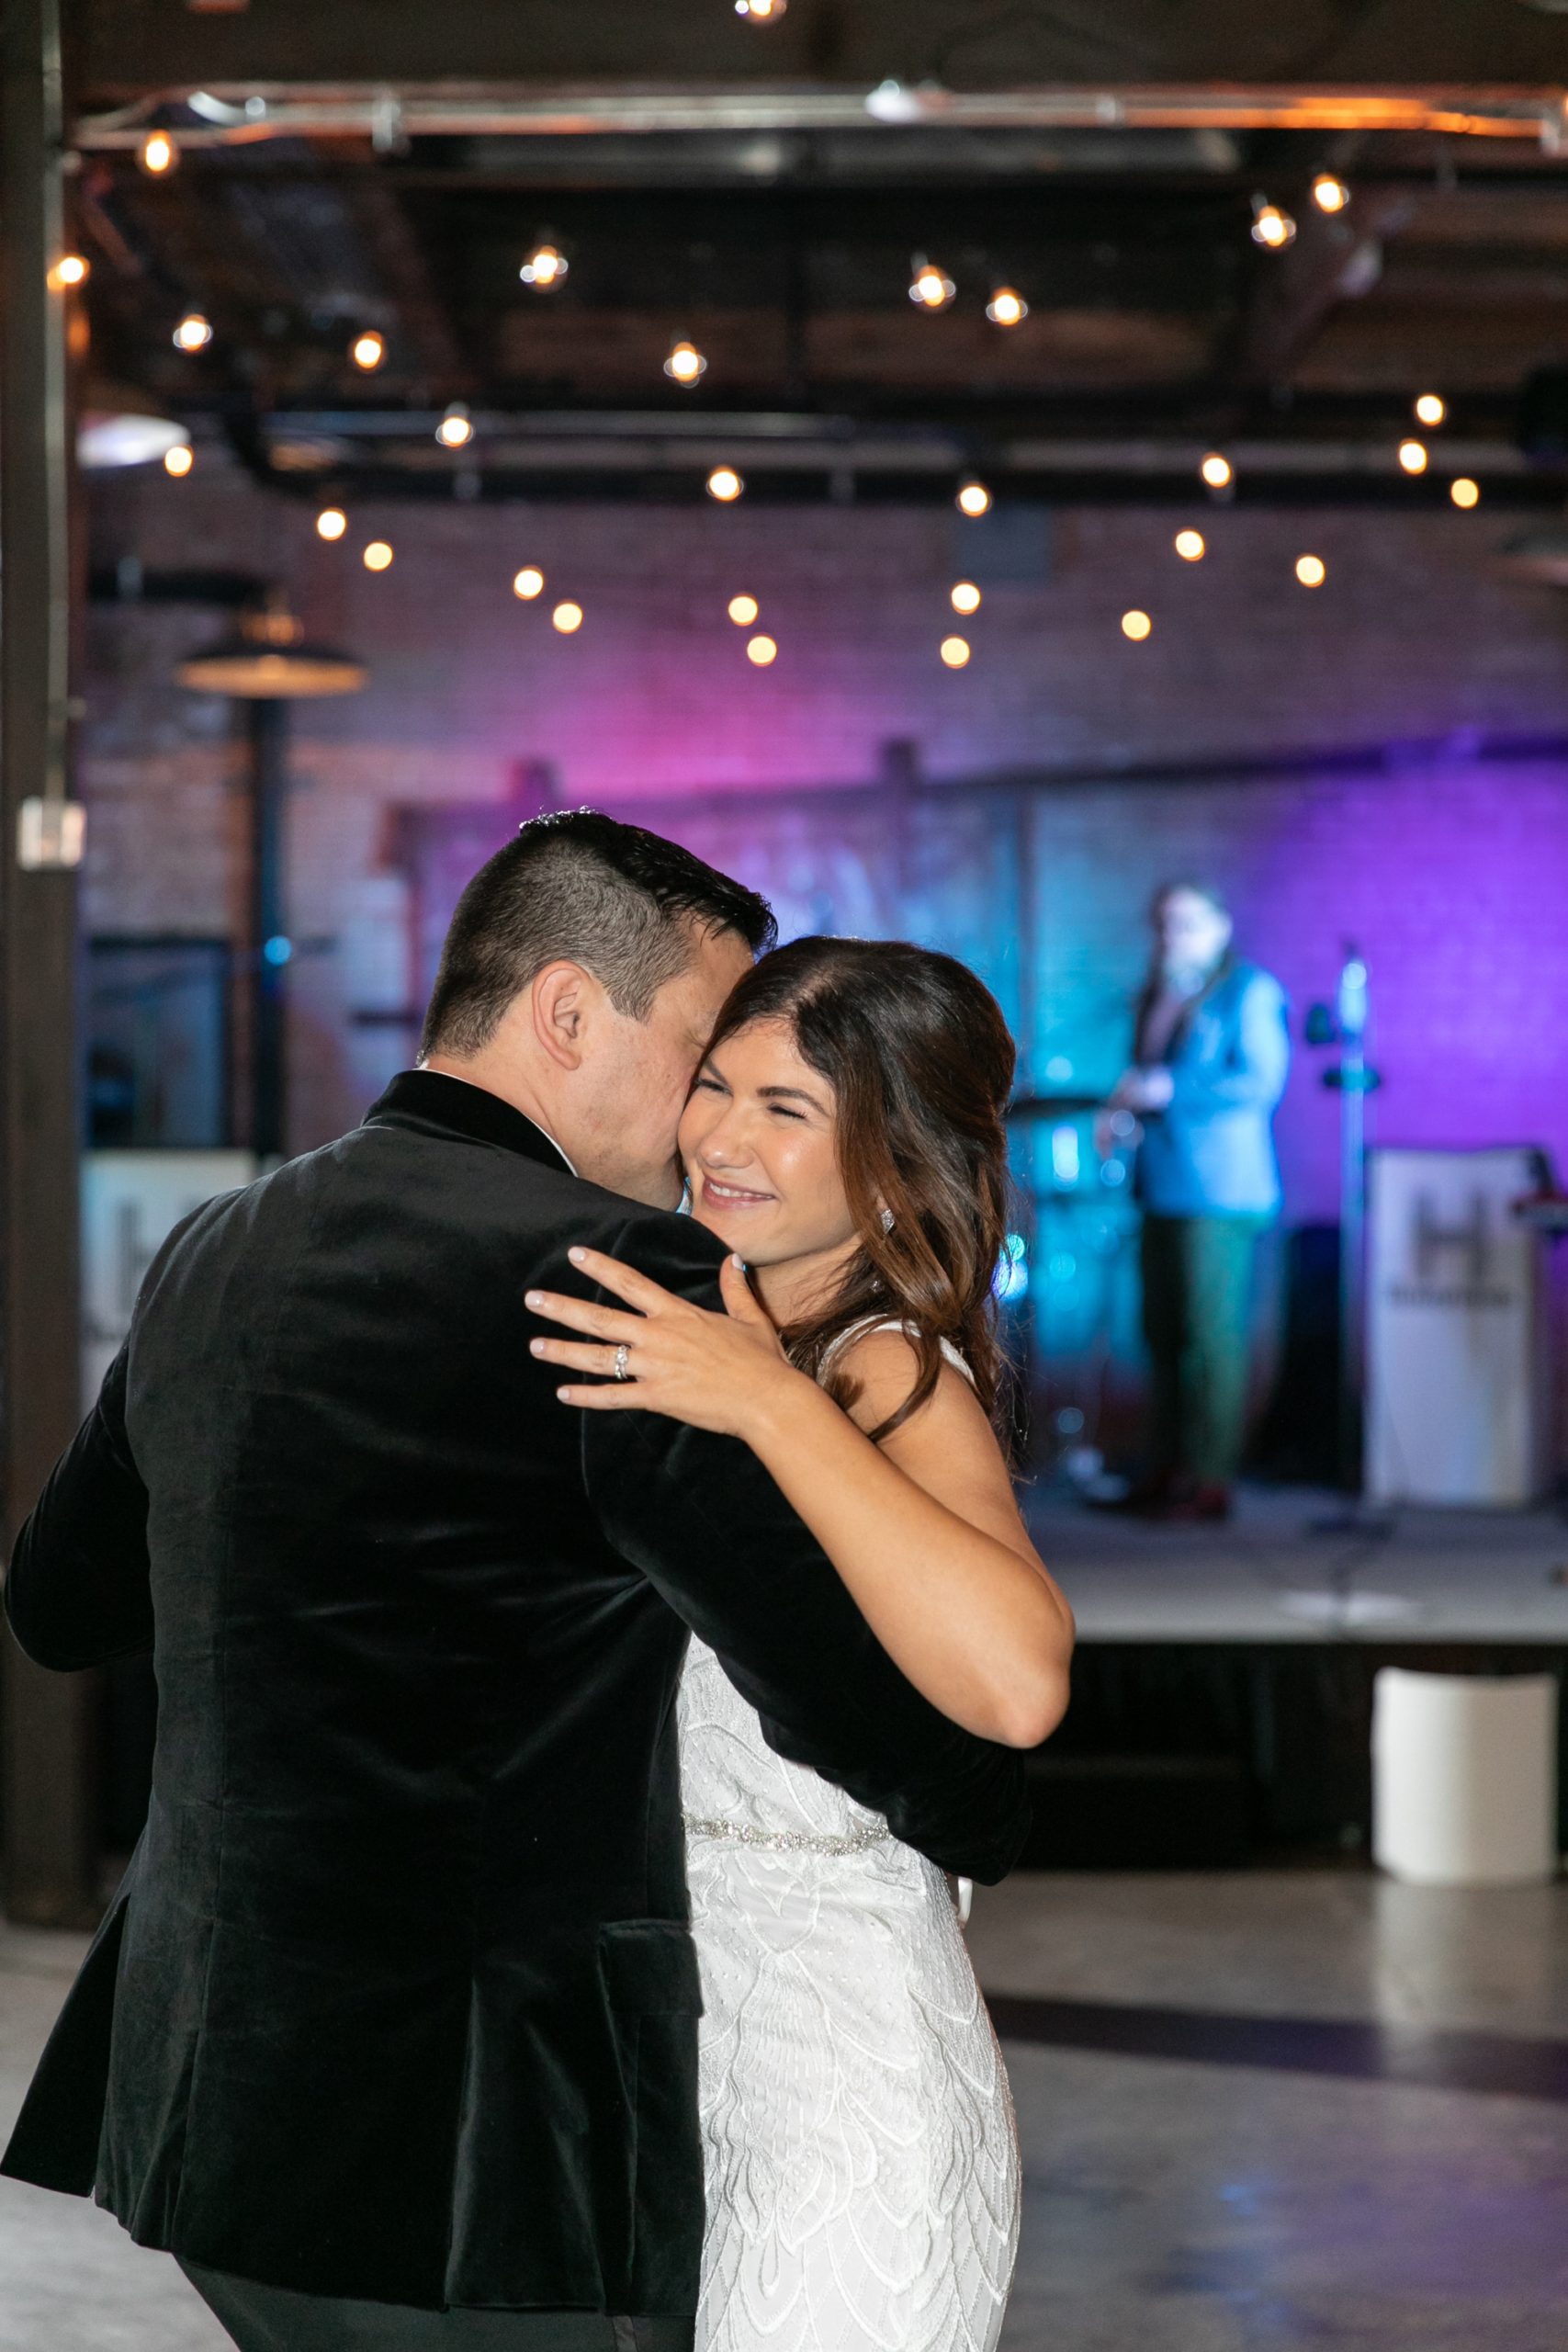 the bride and groom shared a sweet first dance at their Morgan Manufacturing wedding